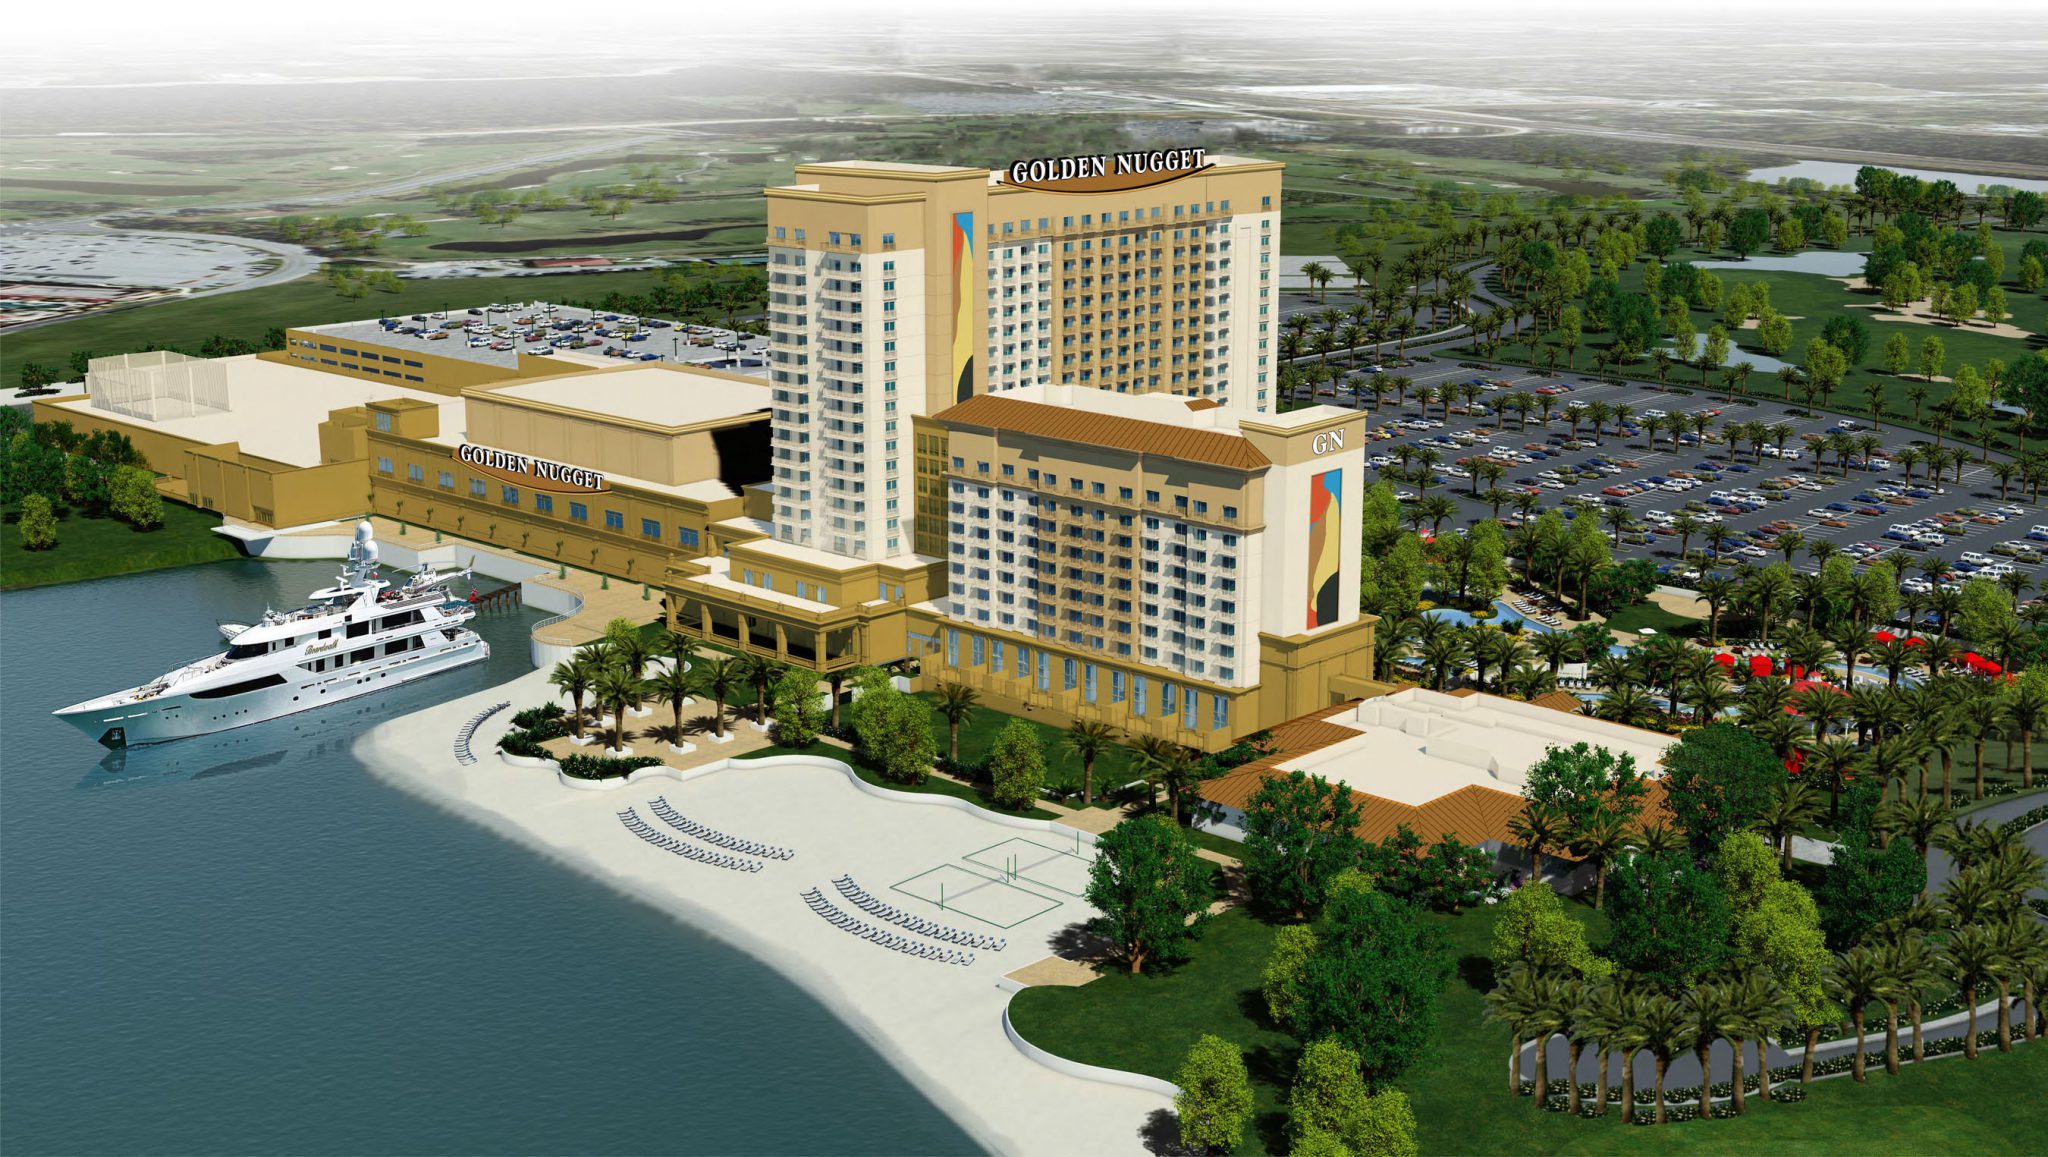 Golden Nugget Lake Charles Welcomes The High-Tech Texan (and all Texans)